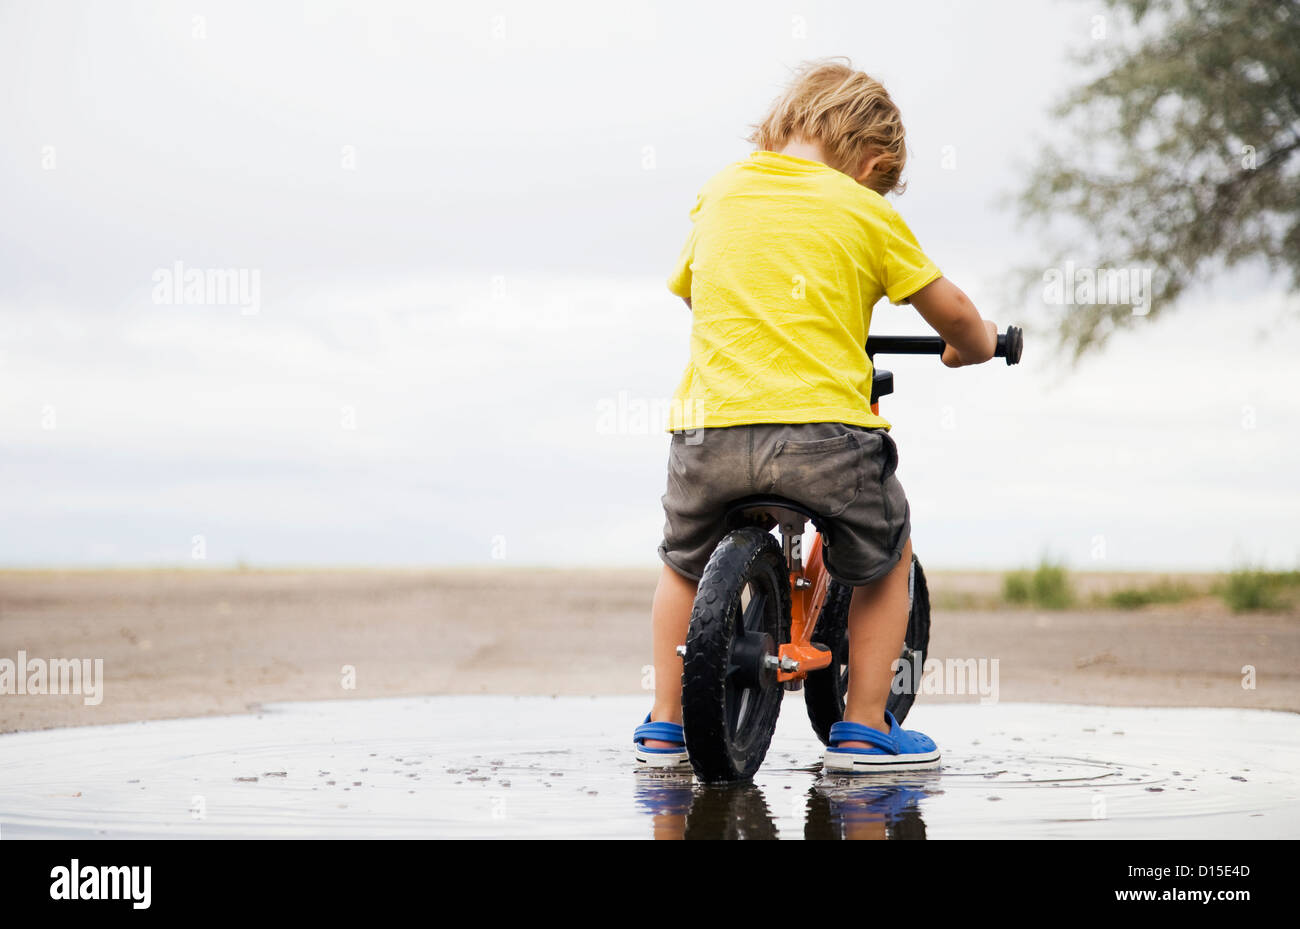 USA, Colorado, Toddler boy (2-3) riding bicycle in puddle Stock Photo